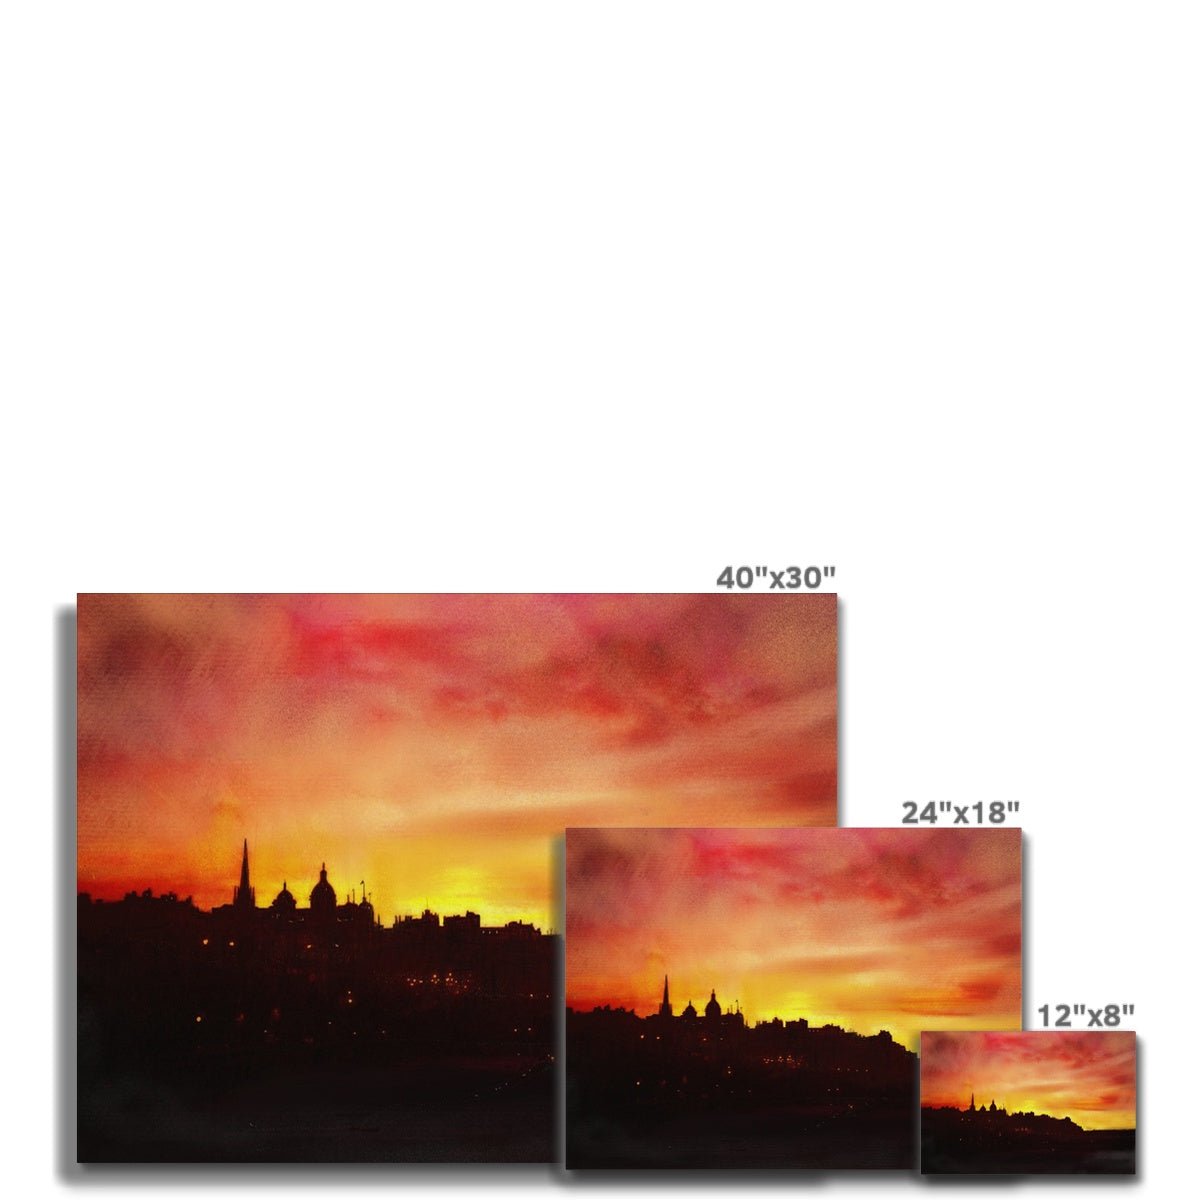 Edinburgh Sunset Painting | Canvas From Scotland-Contemporary Stretched Canvas Prints-Edinburgh & Glasgow Art Gallery-Paintings, Prints, Homeware, Art Gifts From Scotland By Scottish Artist Kevin Hunter